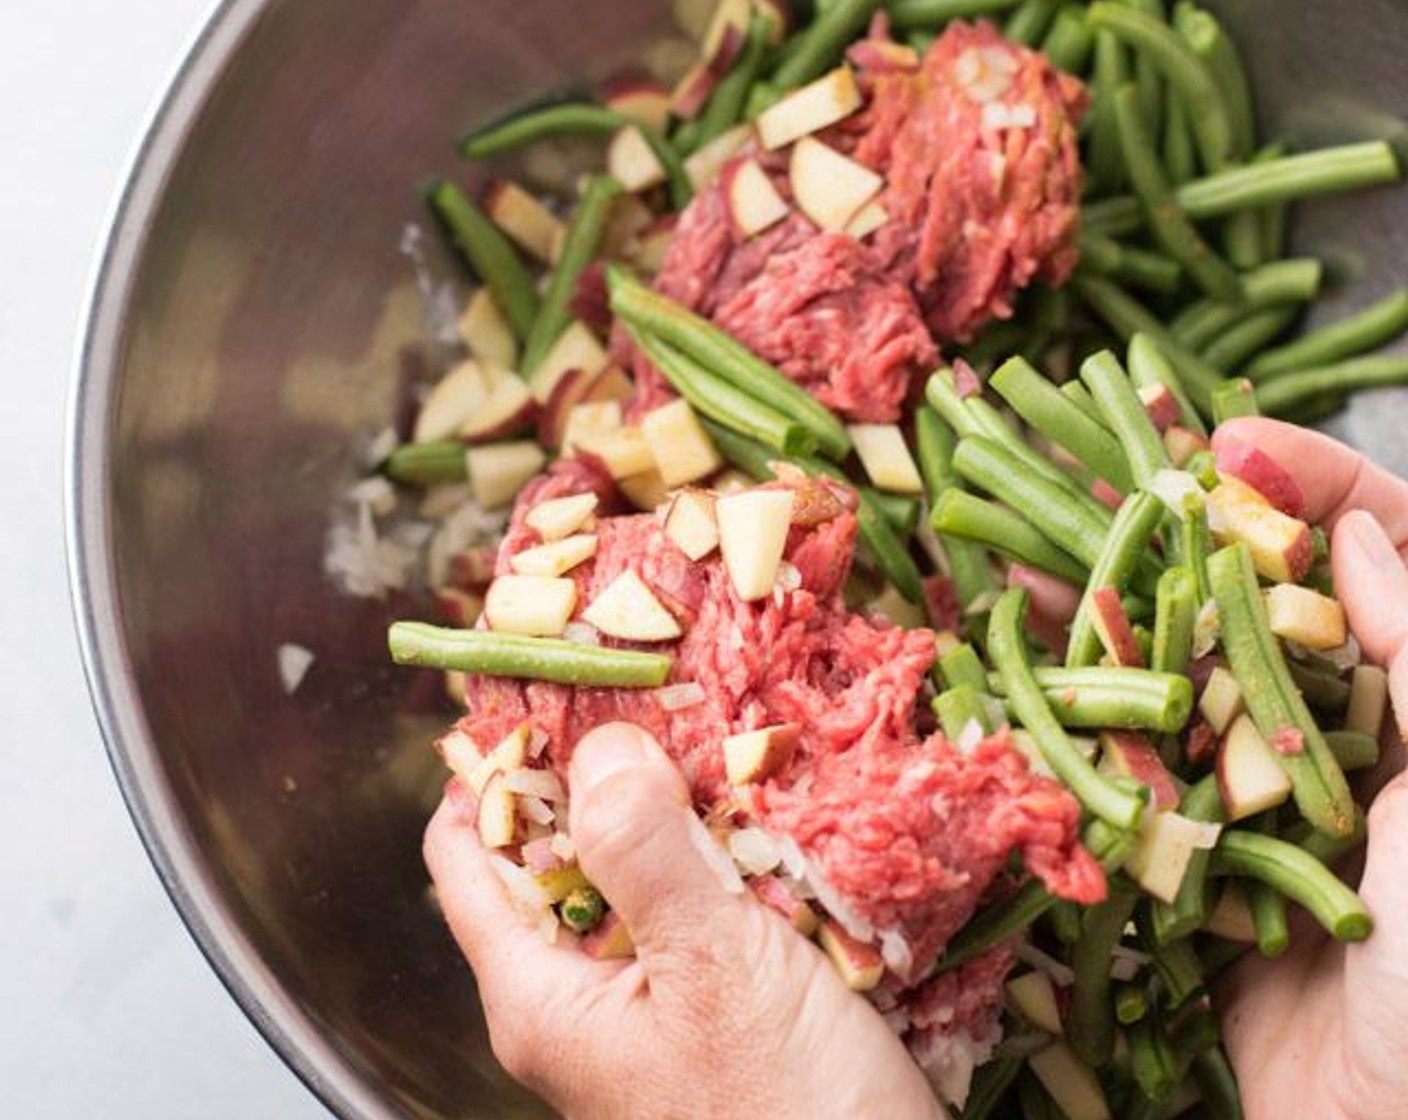 step 1 Prepare and measure out all ingredients. In an extra-large mixing bowl, combine the 90/10 Lean Ground Beef (1 lb), Red Potatoes (2 cups), Green Beans (4 cups), Onion (1/2 cup), Egg (1), Salt (1 tsp), Ground Cumin (1 tsp) and Freshly Ground Black Pepper (1/4 tsp) together with your hands.